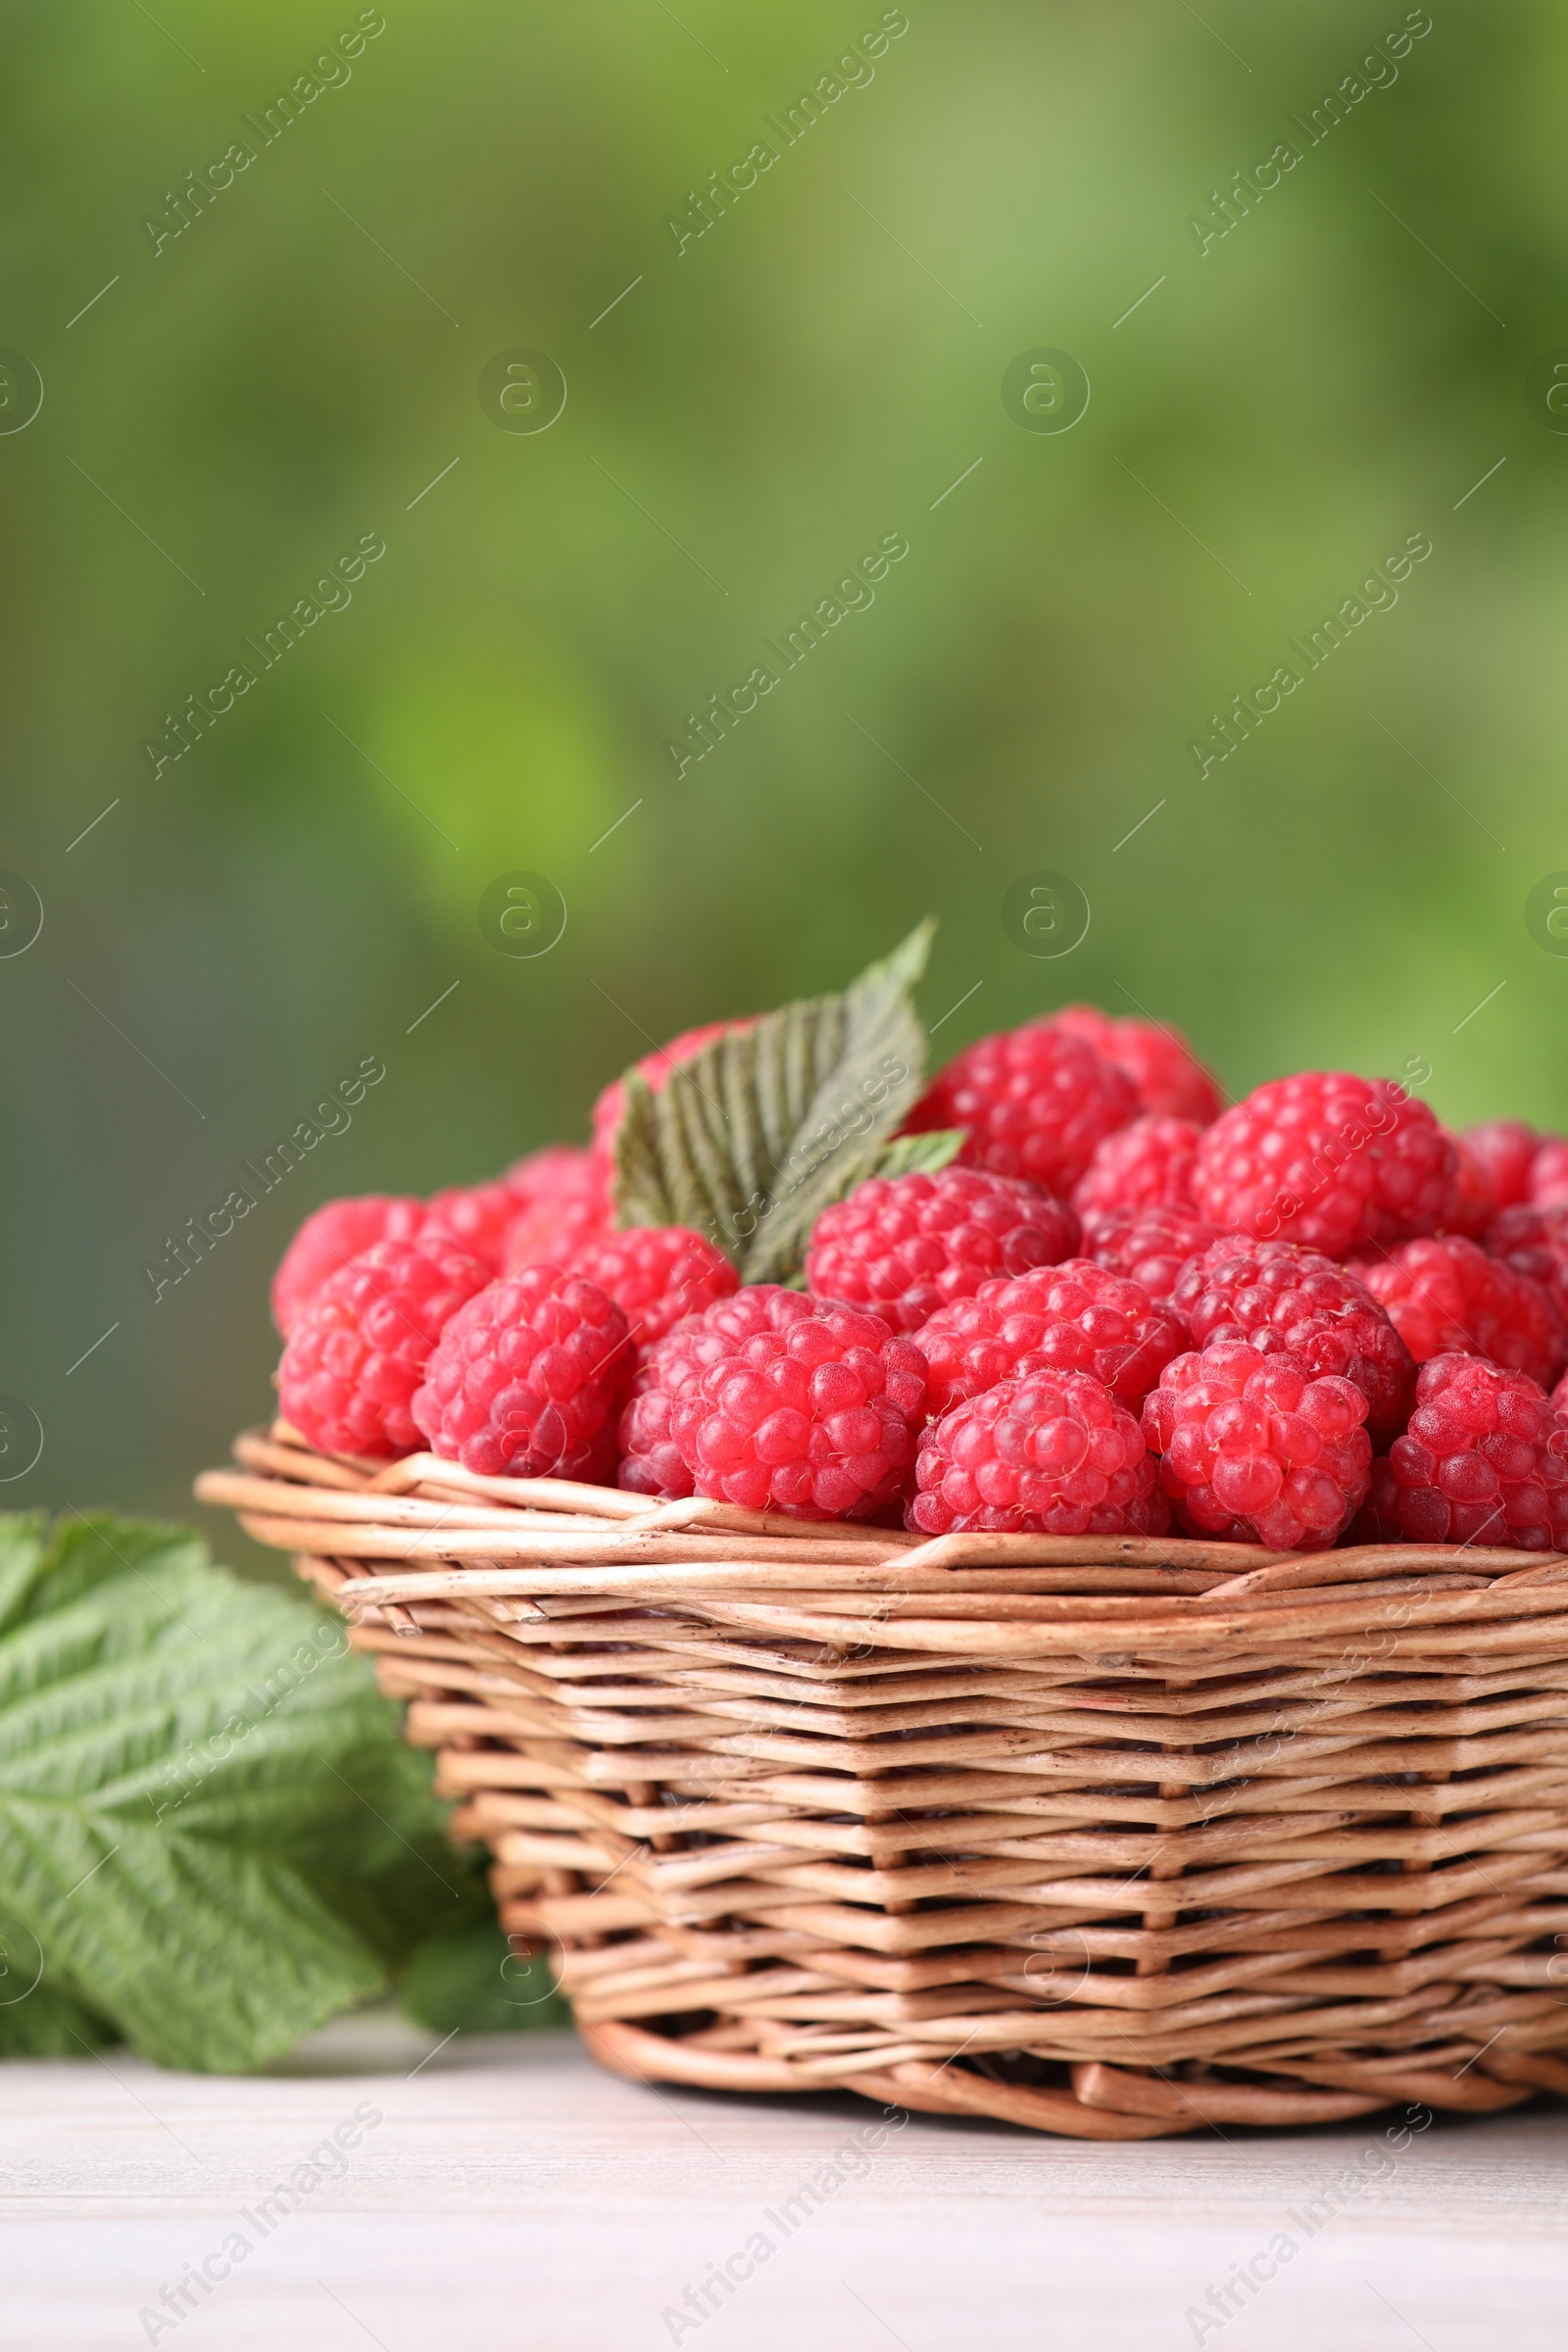 Photo of Wicker basket with tasty ripe raspberries and leaves on white wooden table against blurred green background, closeup. Space for text